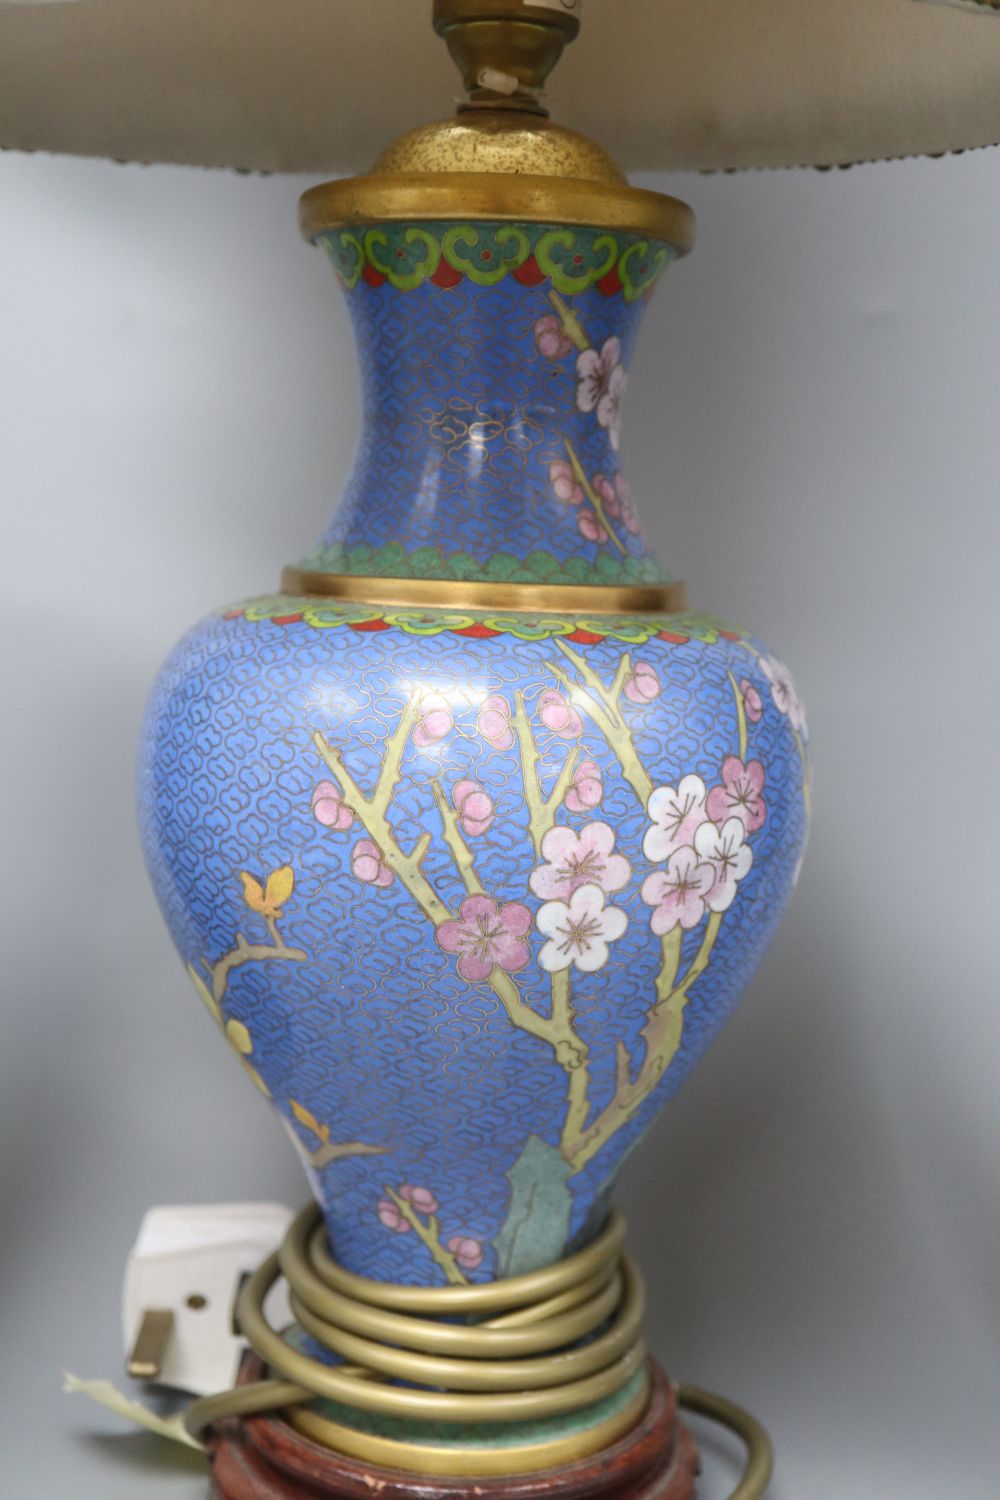 A pair of Chinese bronze iris decorated vases, height 28cm and a cloisonne lamp